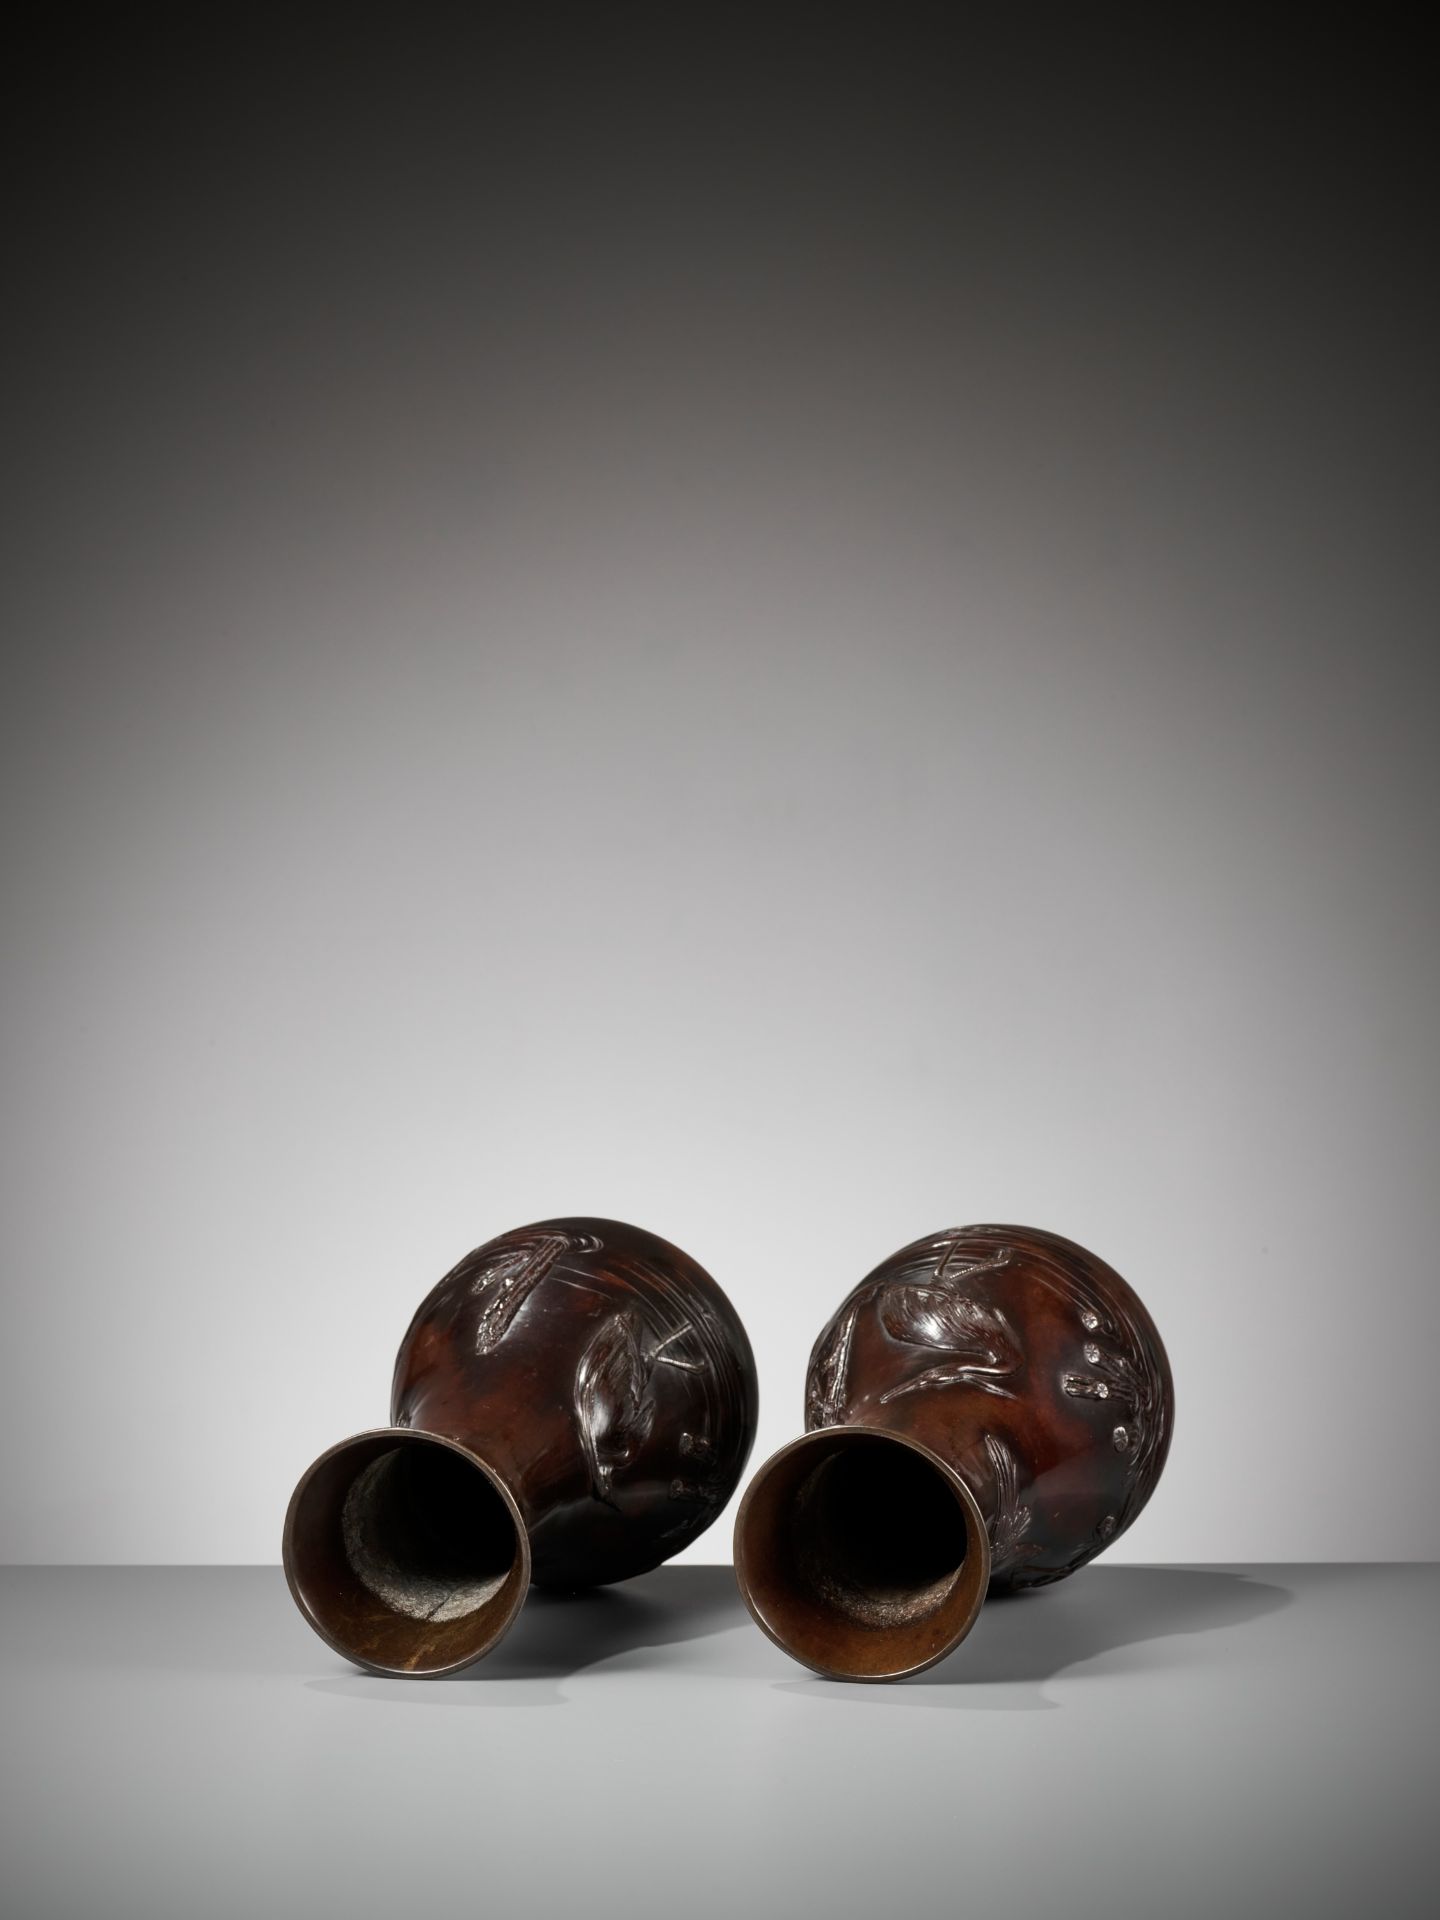 A PAIR OF BRONZE VASES DEPICTING EGRETS - Image 7 of 8